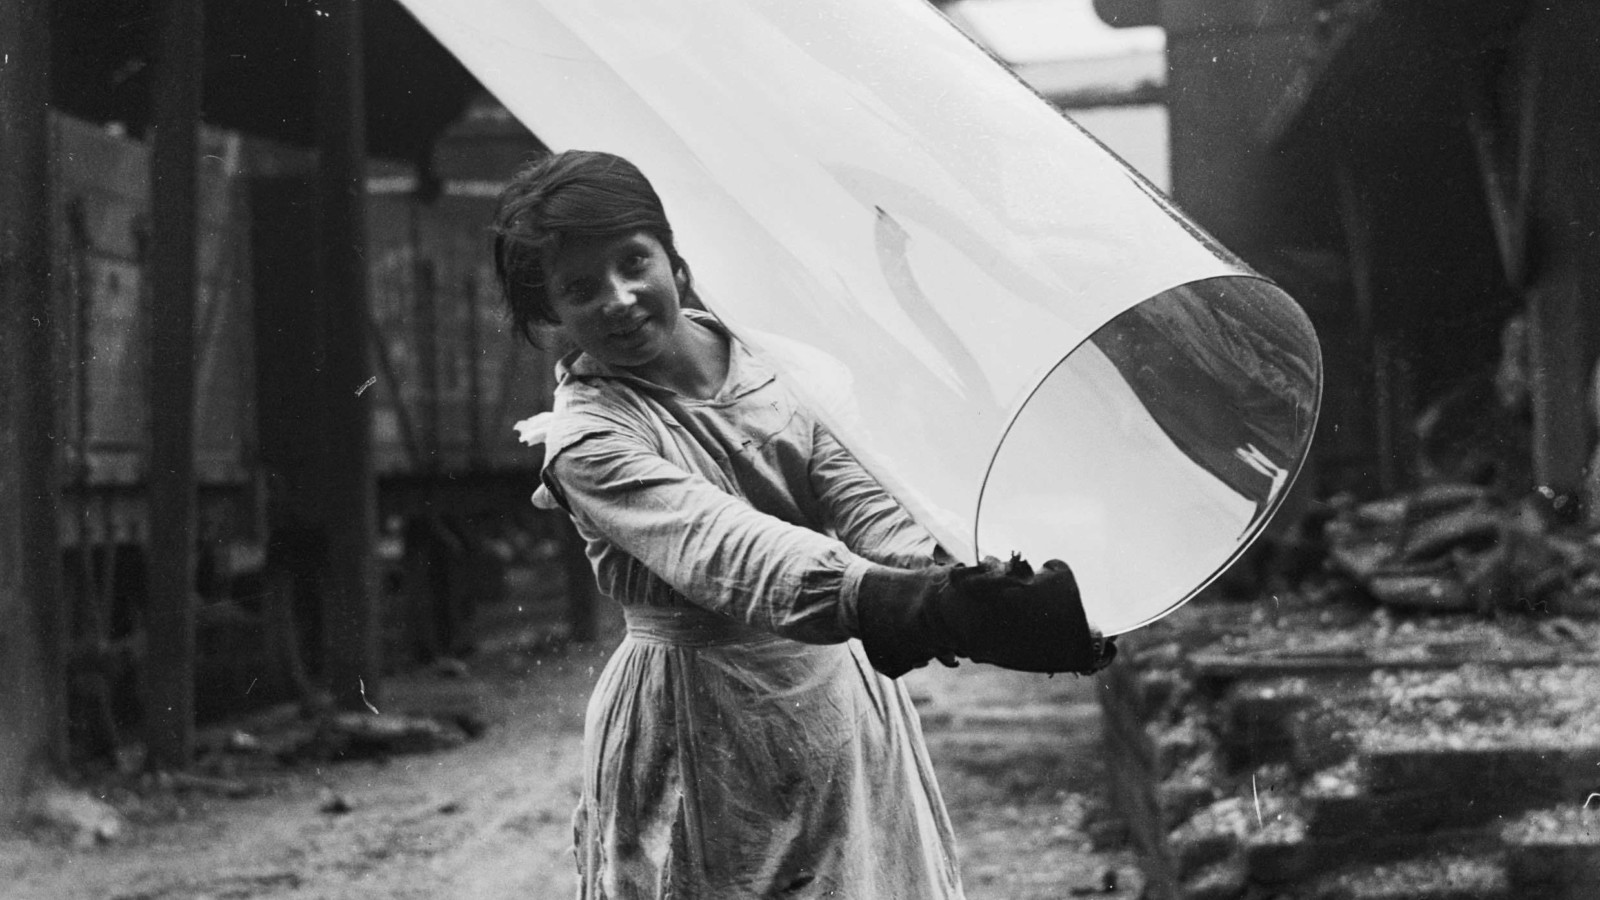 A black and white photo of a girl carrying a large glass cylinder.